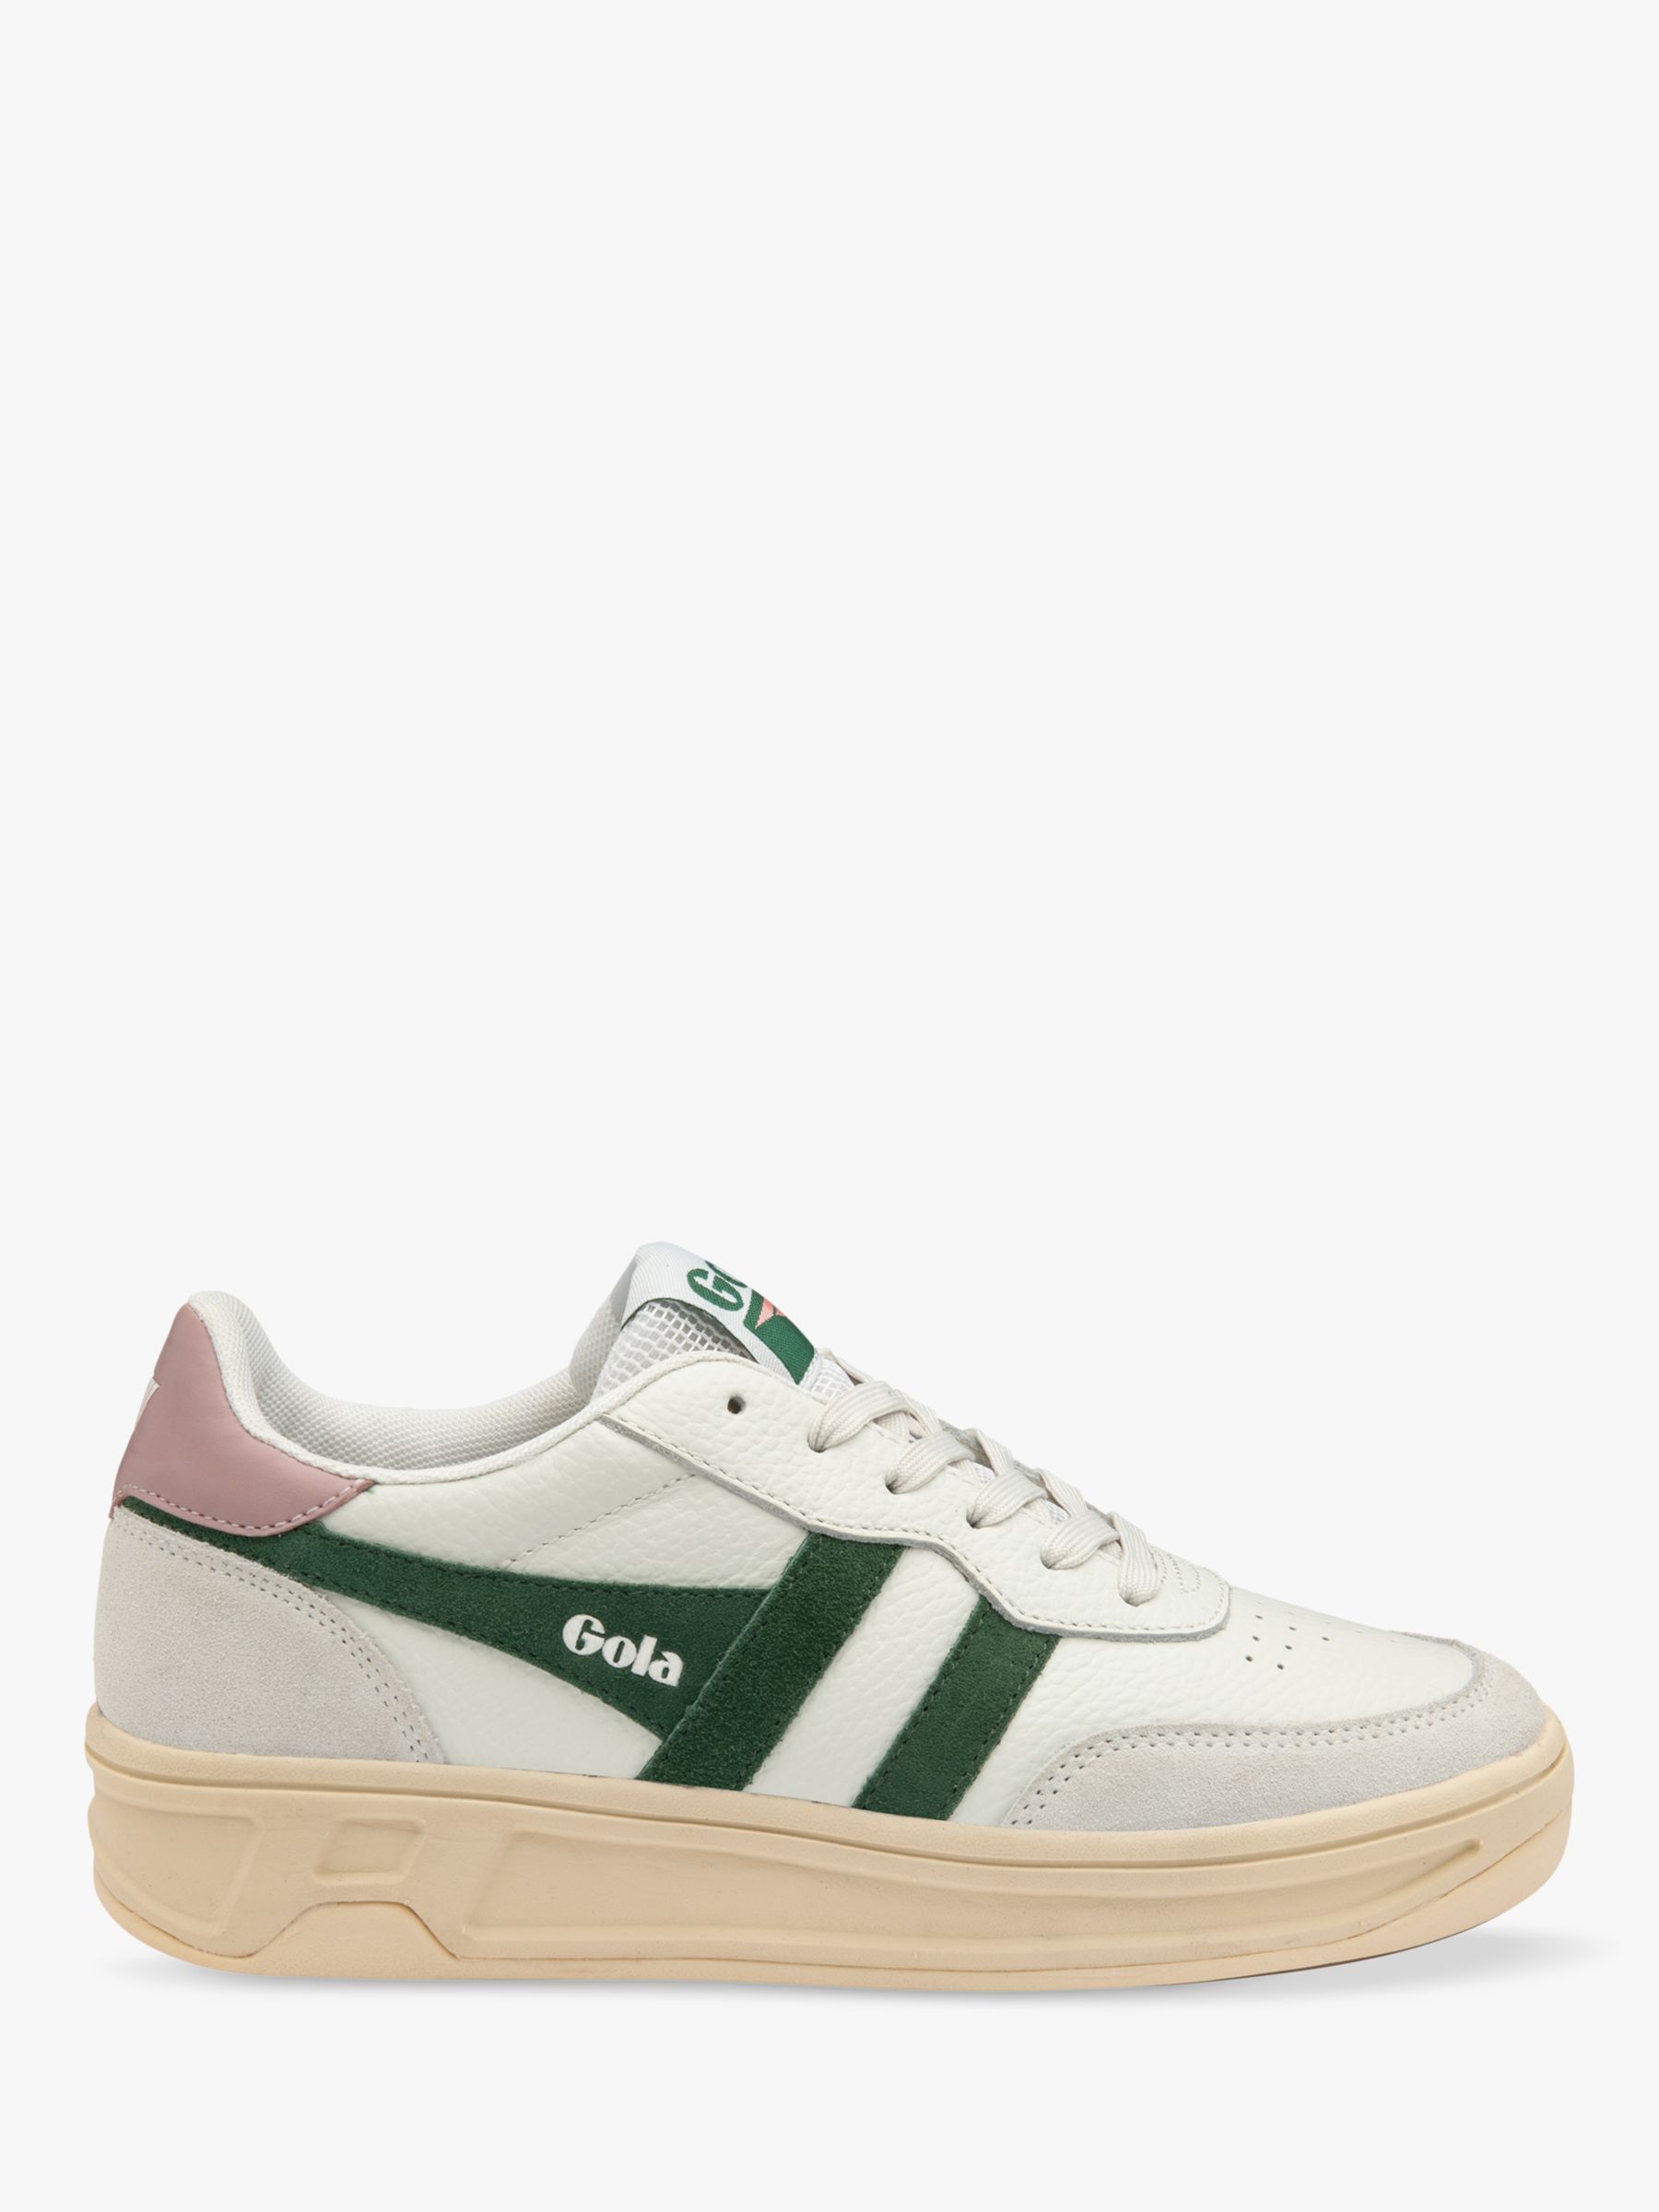 Gola Classics Topspin Leather Lace Up Trainers, White/Evergreen/Pink at ...